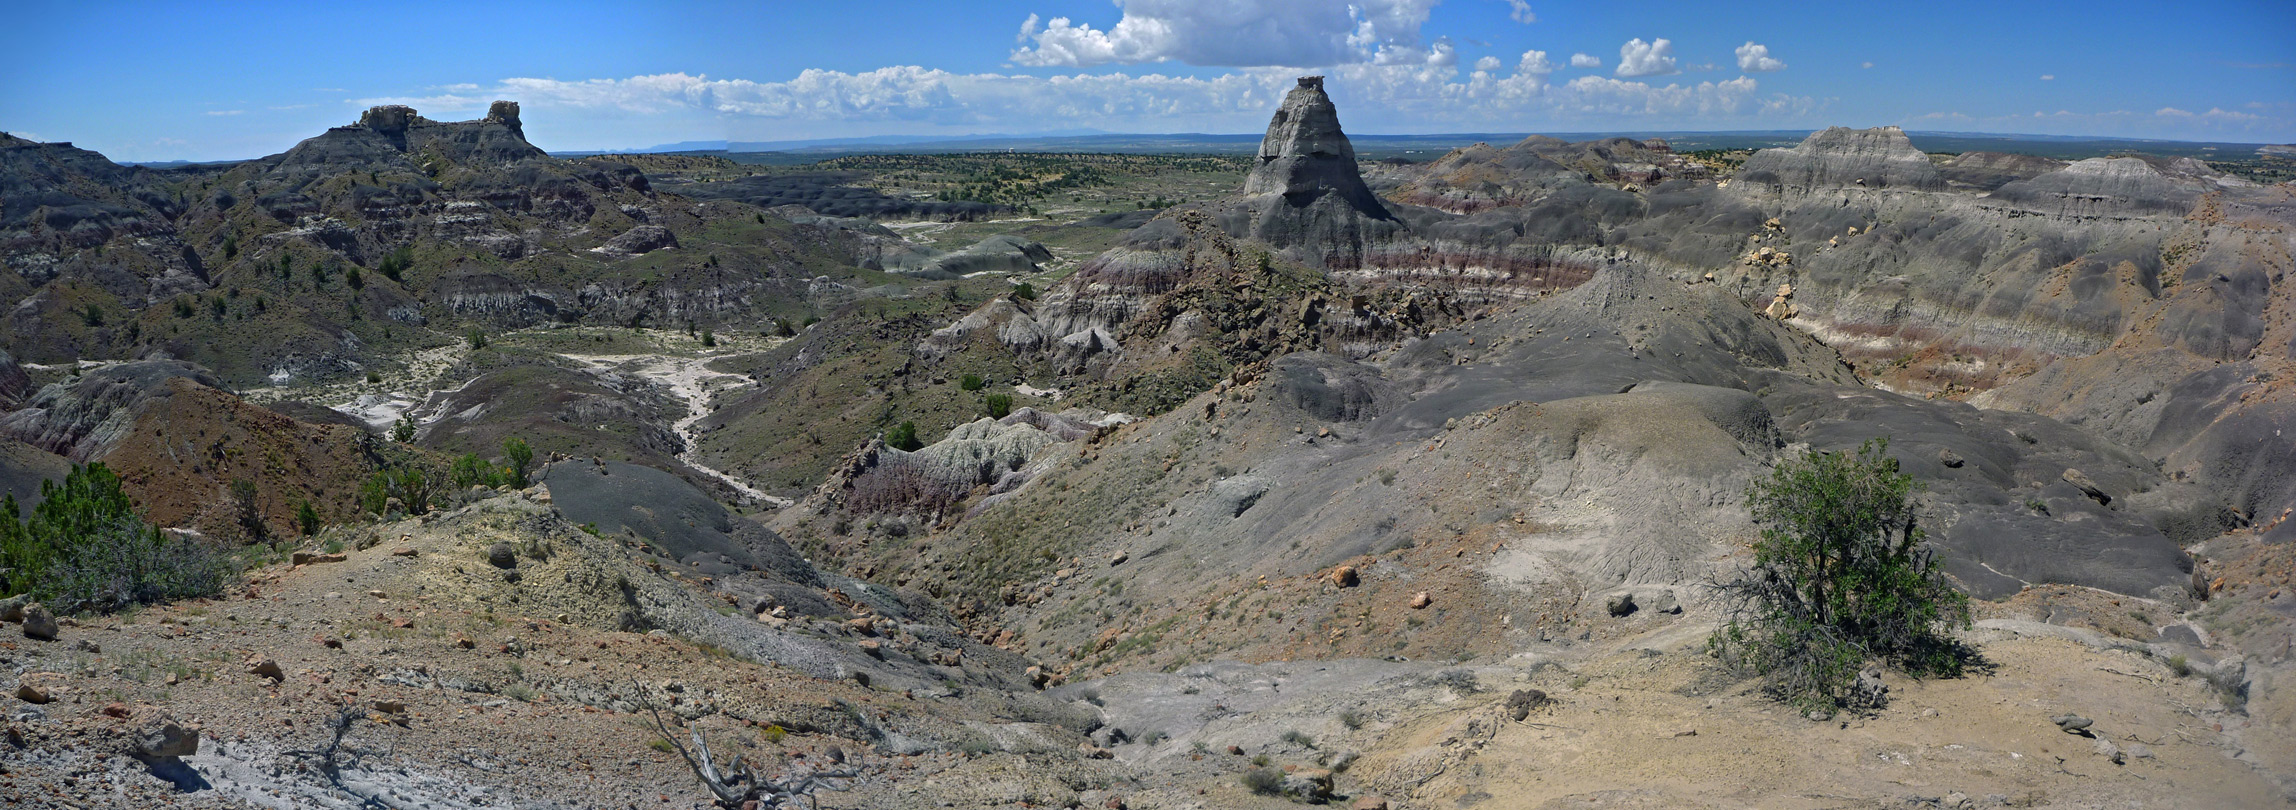 View south over the badlands